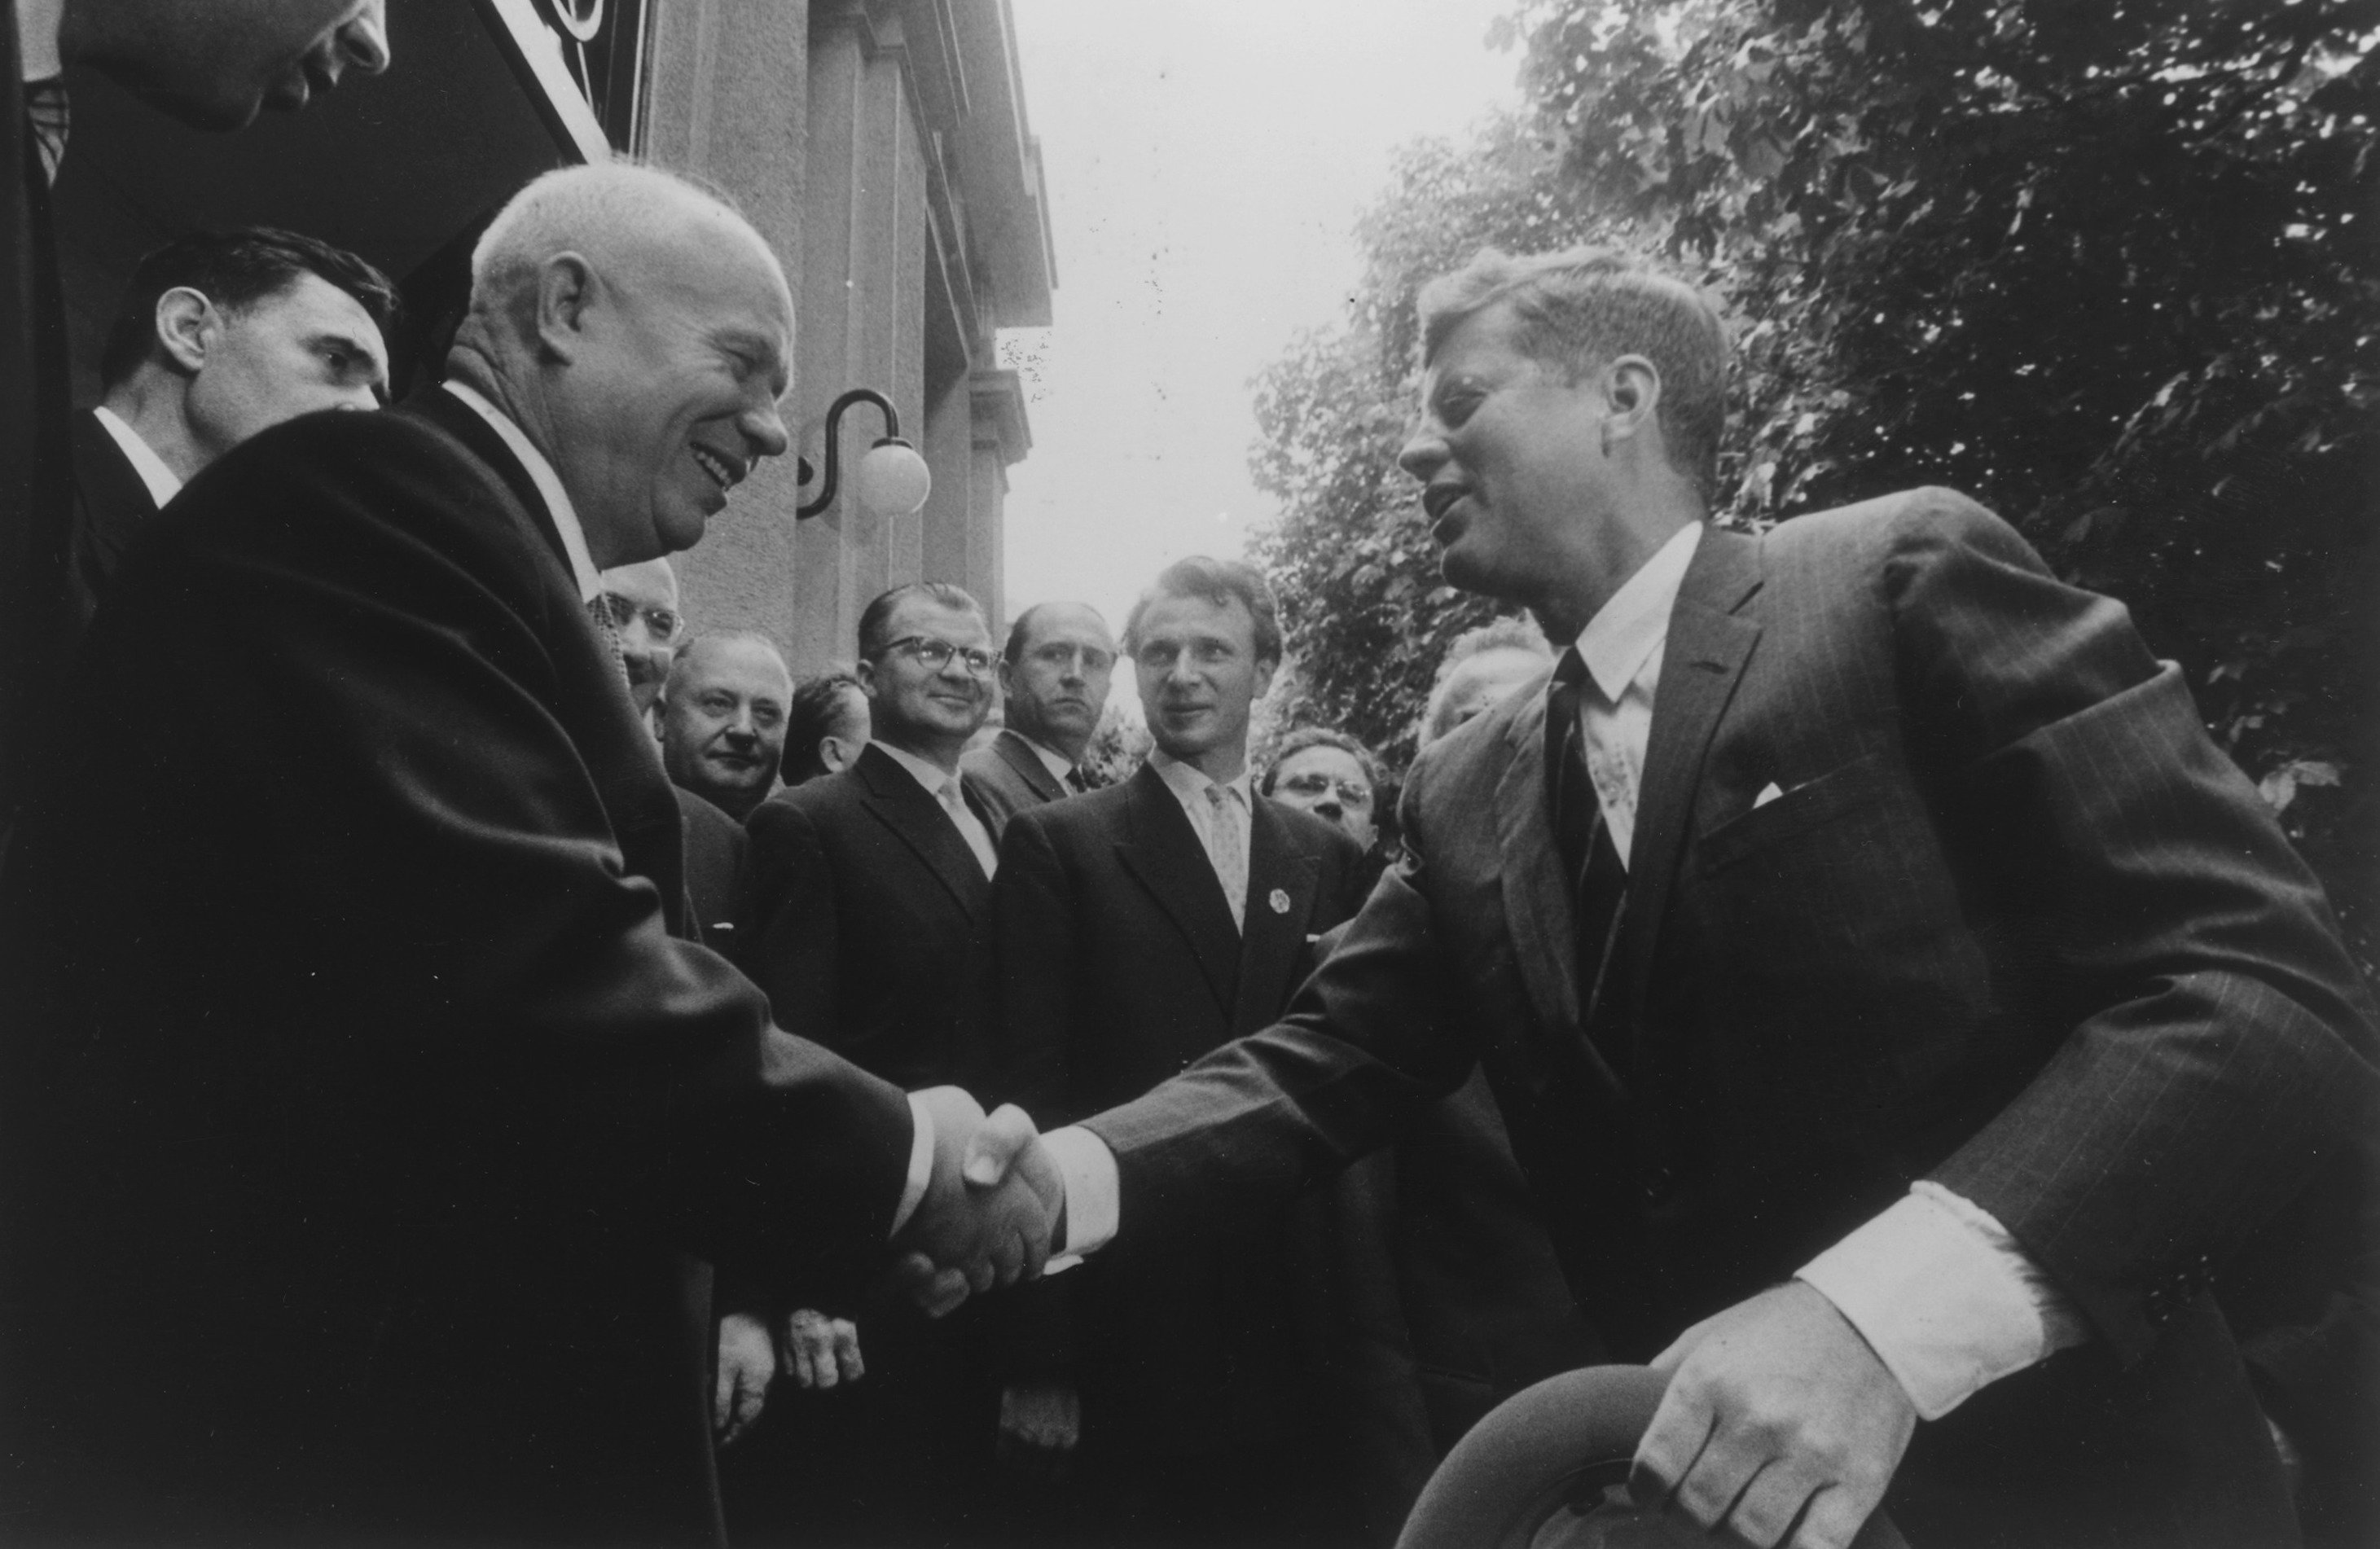 Presidents Nikita Khrushchev and John F. Kennedy shaking hands during the Thaw. Image: Stanley Tretick under a CC License